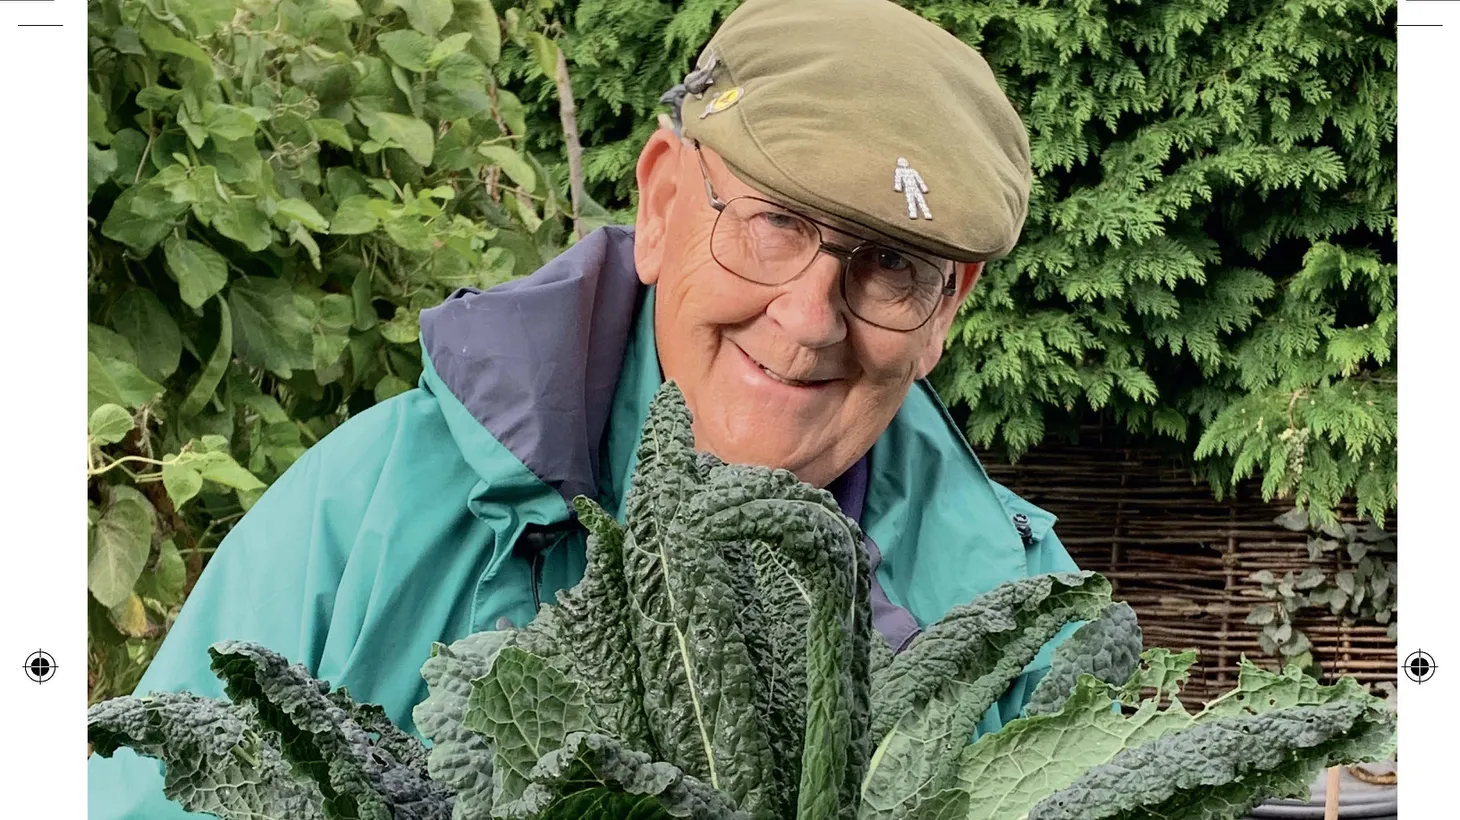 After retiring, Gerald Stratford took to the garden and then Twitter, where he found an audience hungry for his gardening tips.